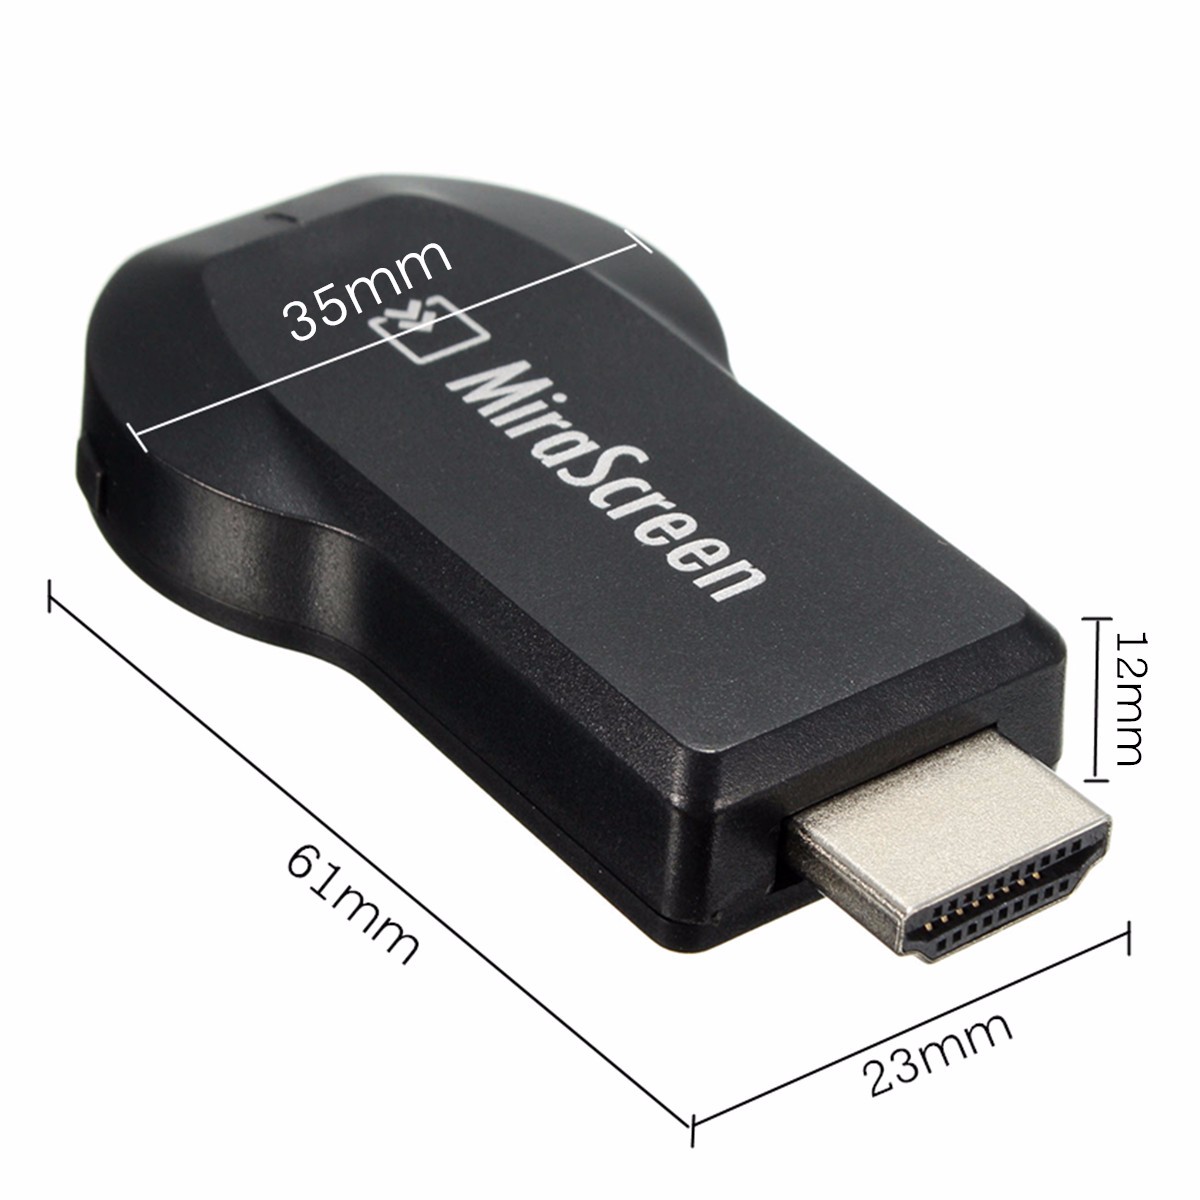 24G-Miracast-Wifi-Display-HD-1080P-HD-AirPlay-DLNA-TV-Dongle-Stick-Receiver-1054250